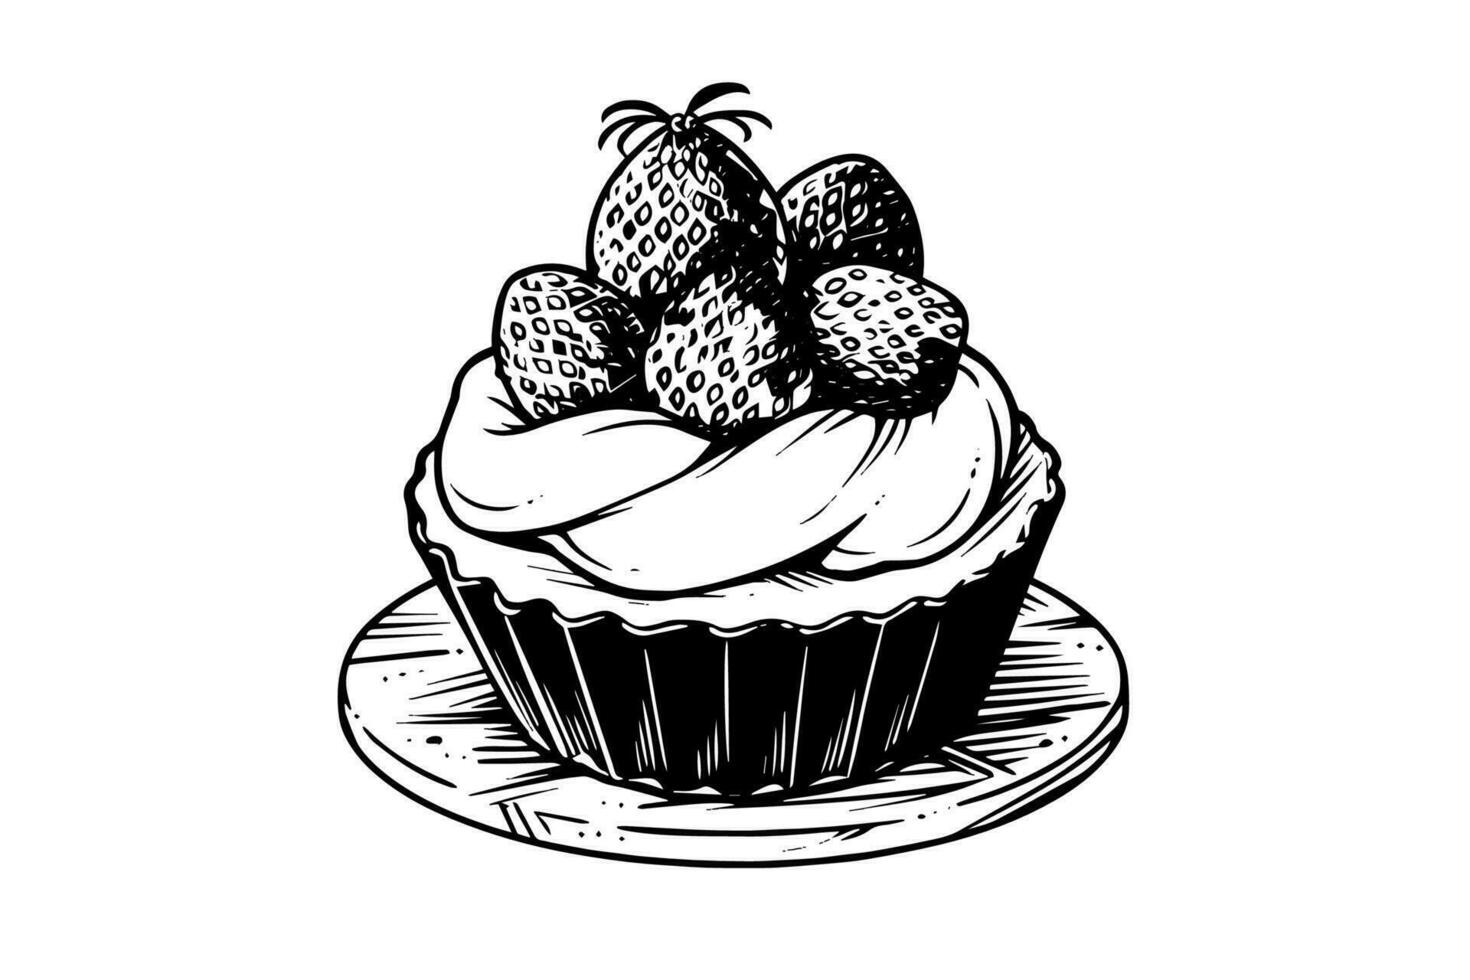 Cupcake with berries in engraving style. Ink sketch isolated on white background. Hand drawn vector illustration